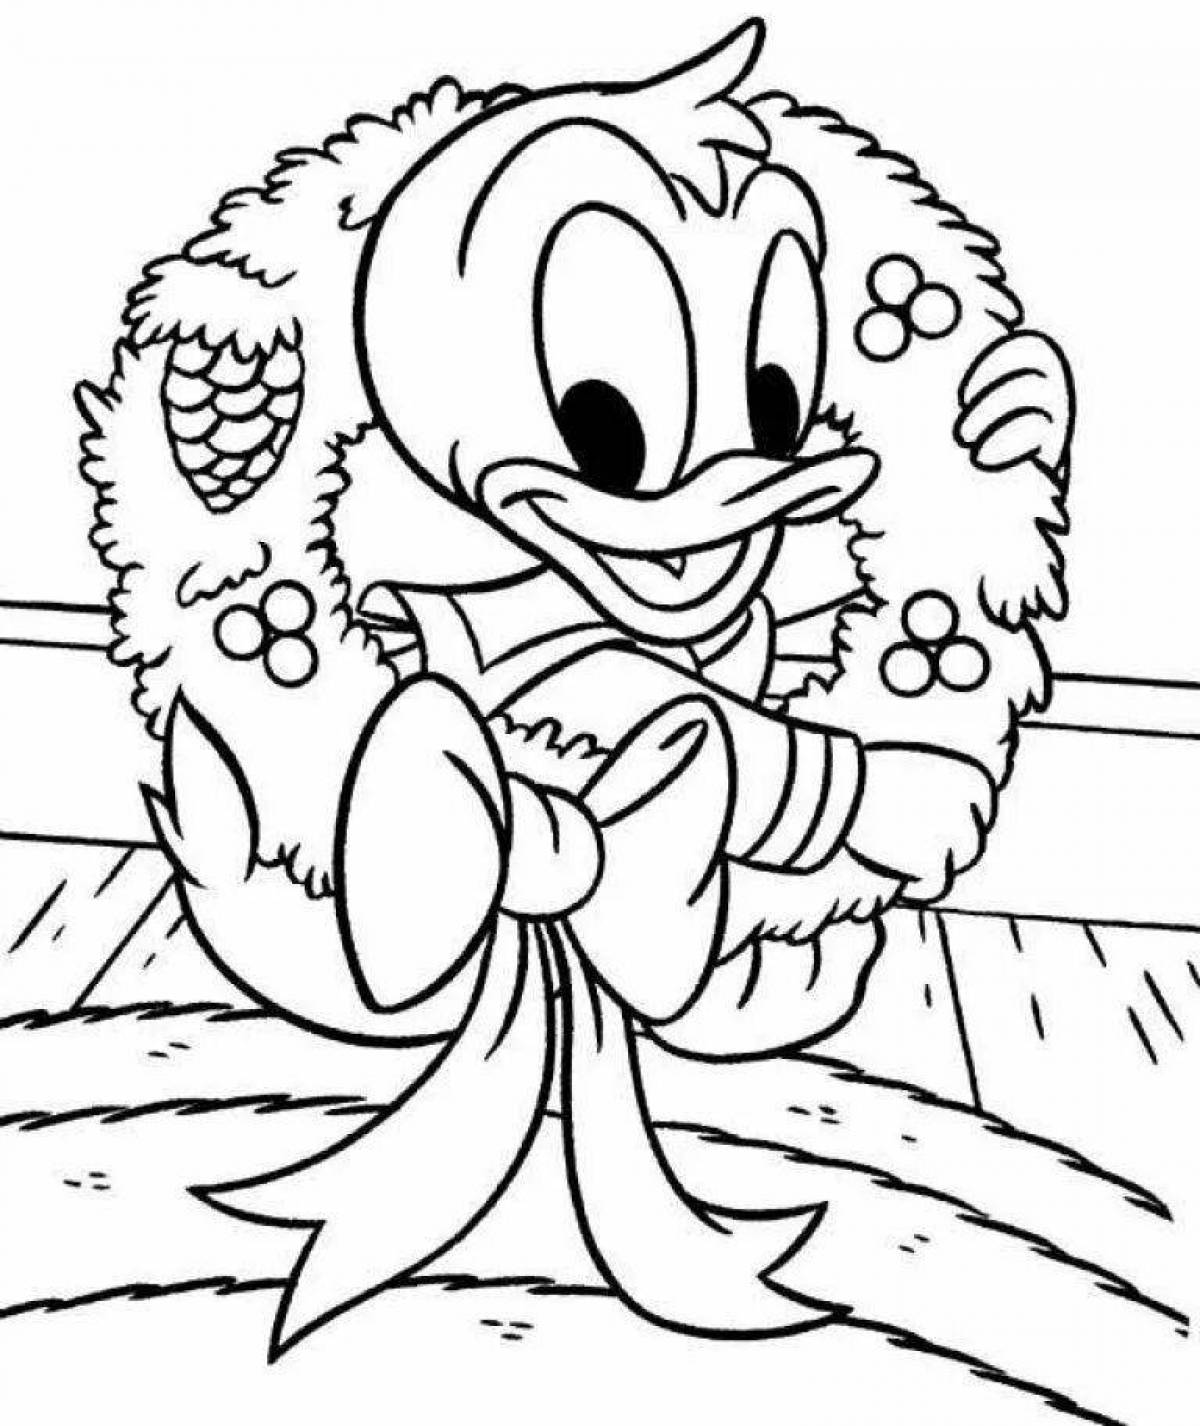 Happy date cartoon coloring page